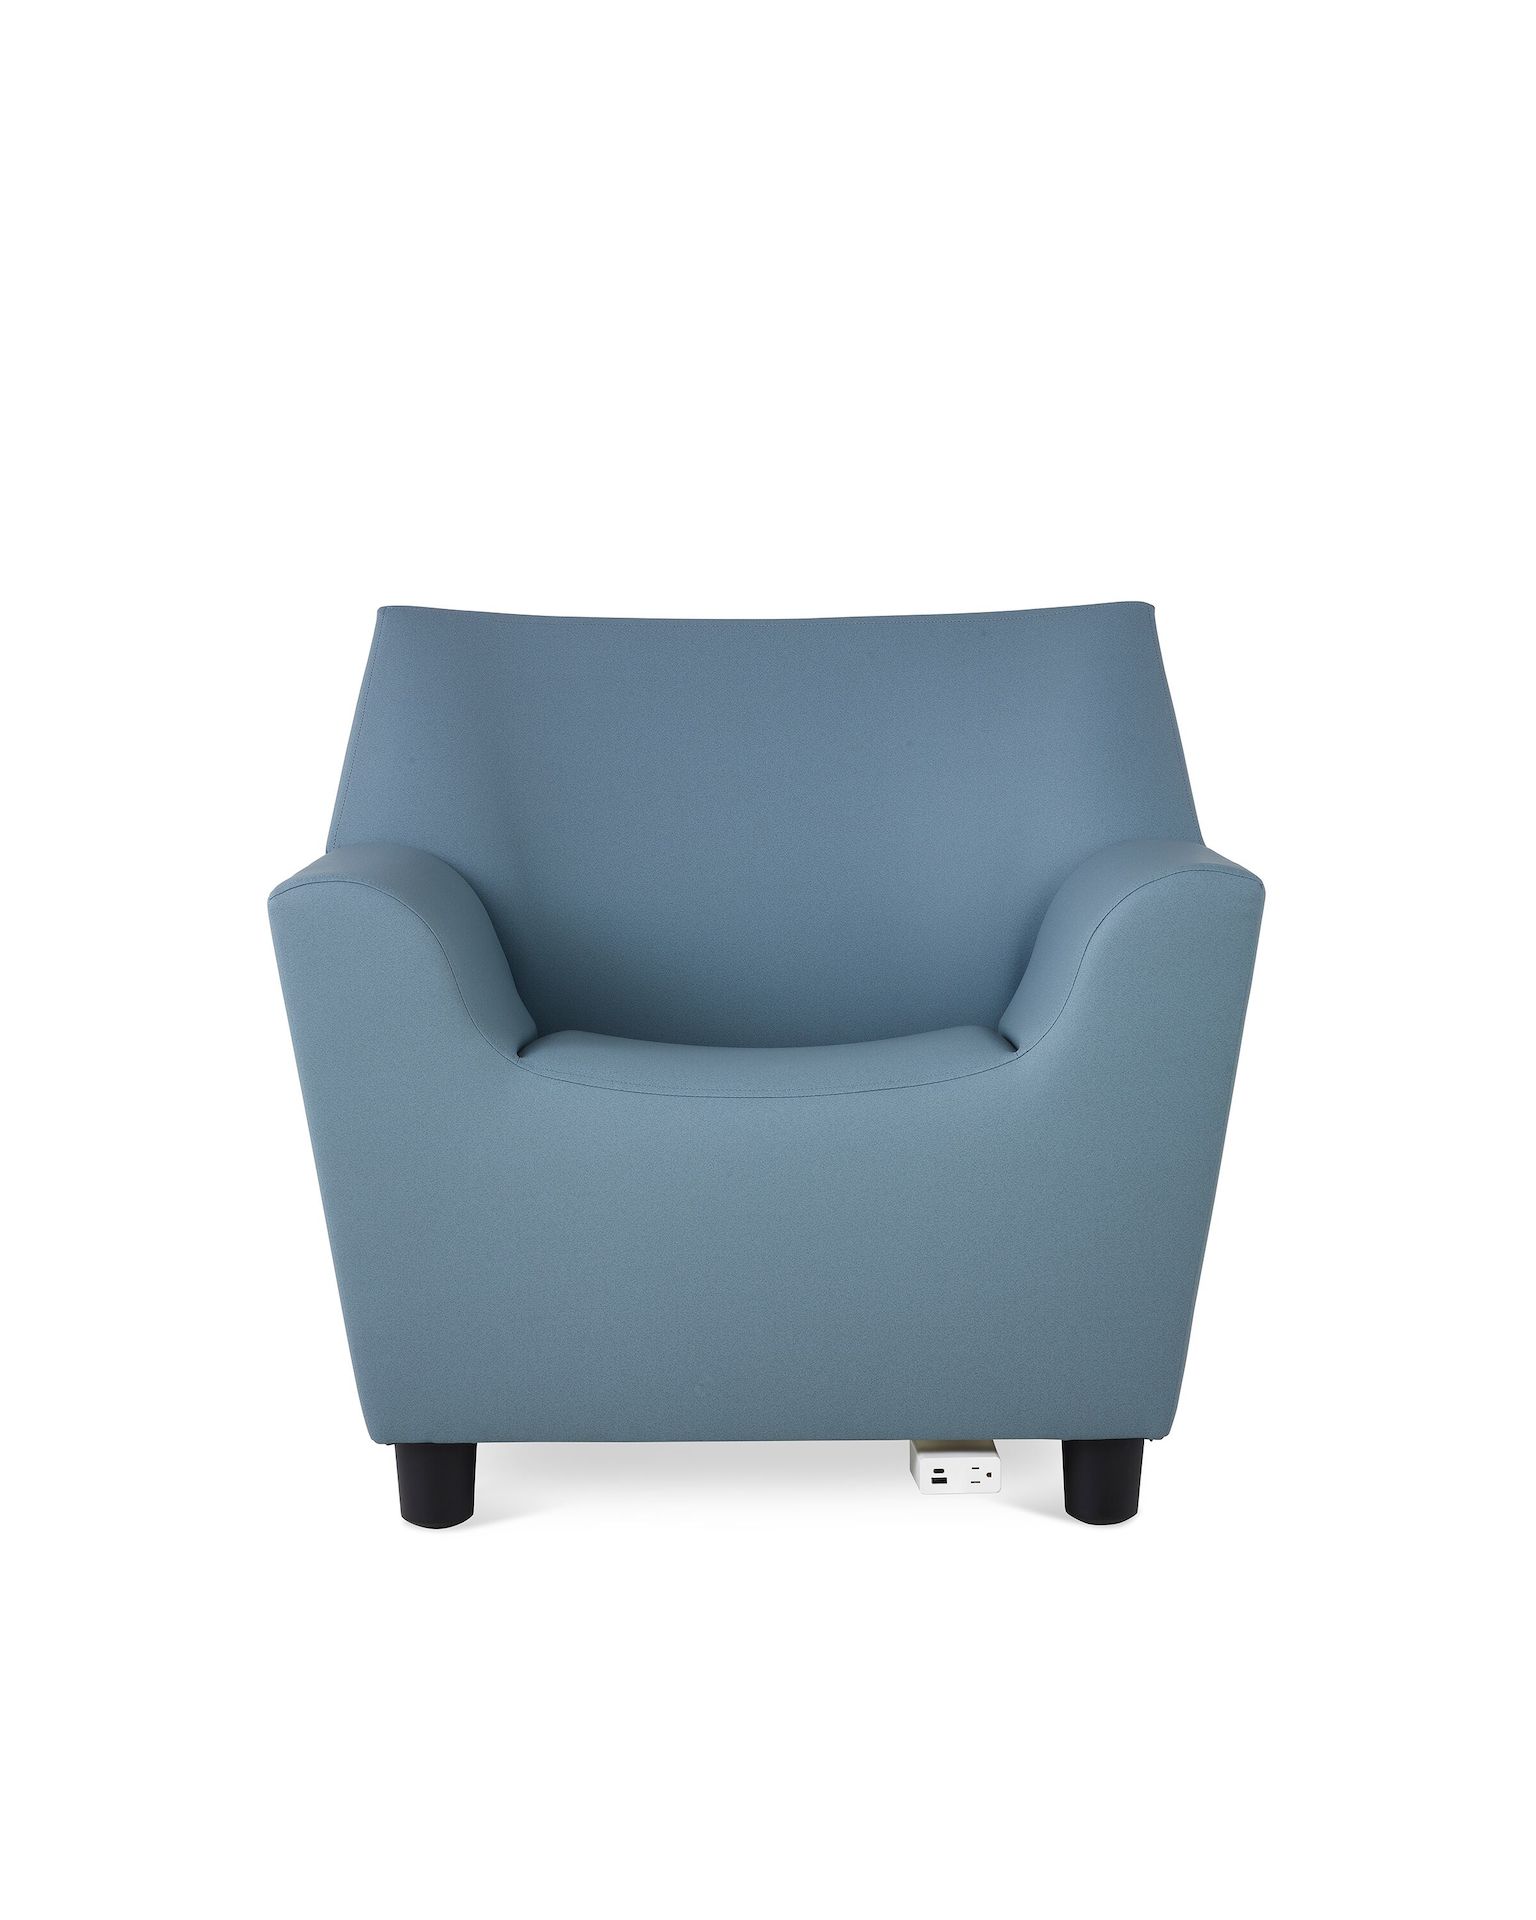 A Swoop Club Chair in a blue upholstery, with an optional power unit and housing. Viewed from the front.